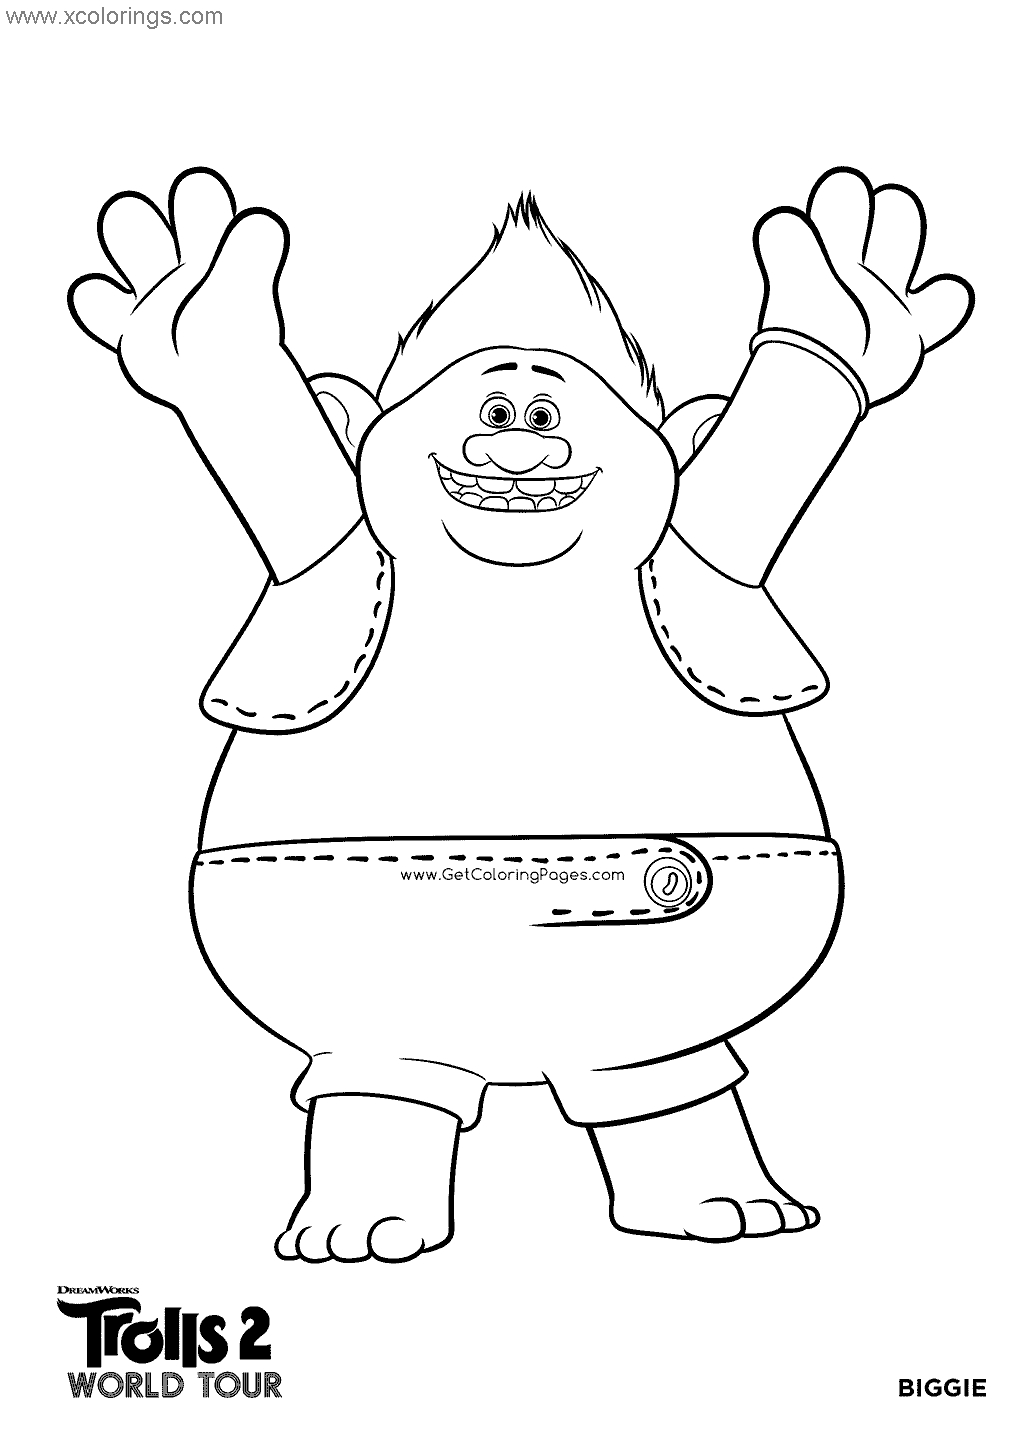 Free Trolls World Tour Biggie Coloring Pages printable